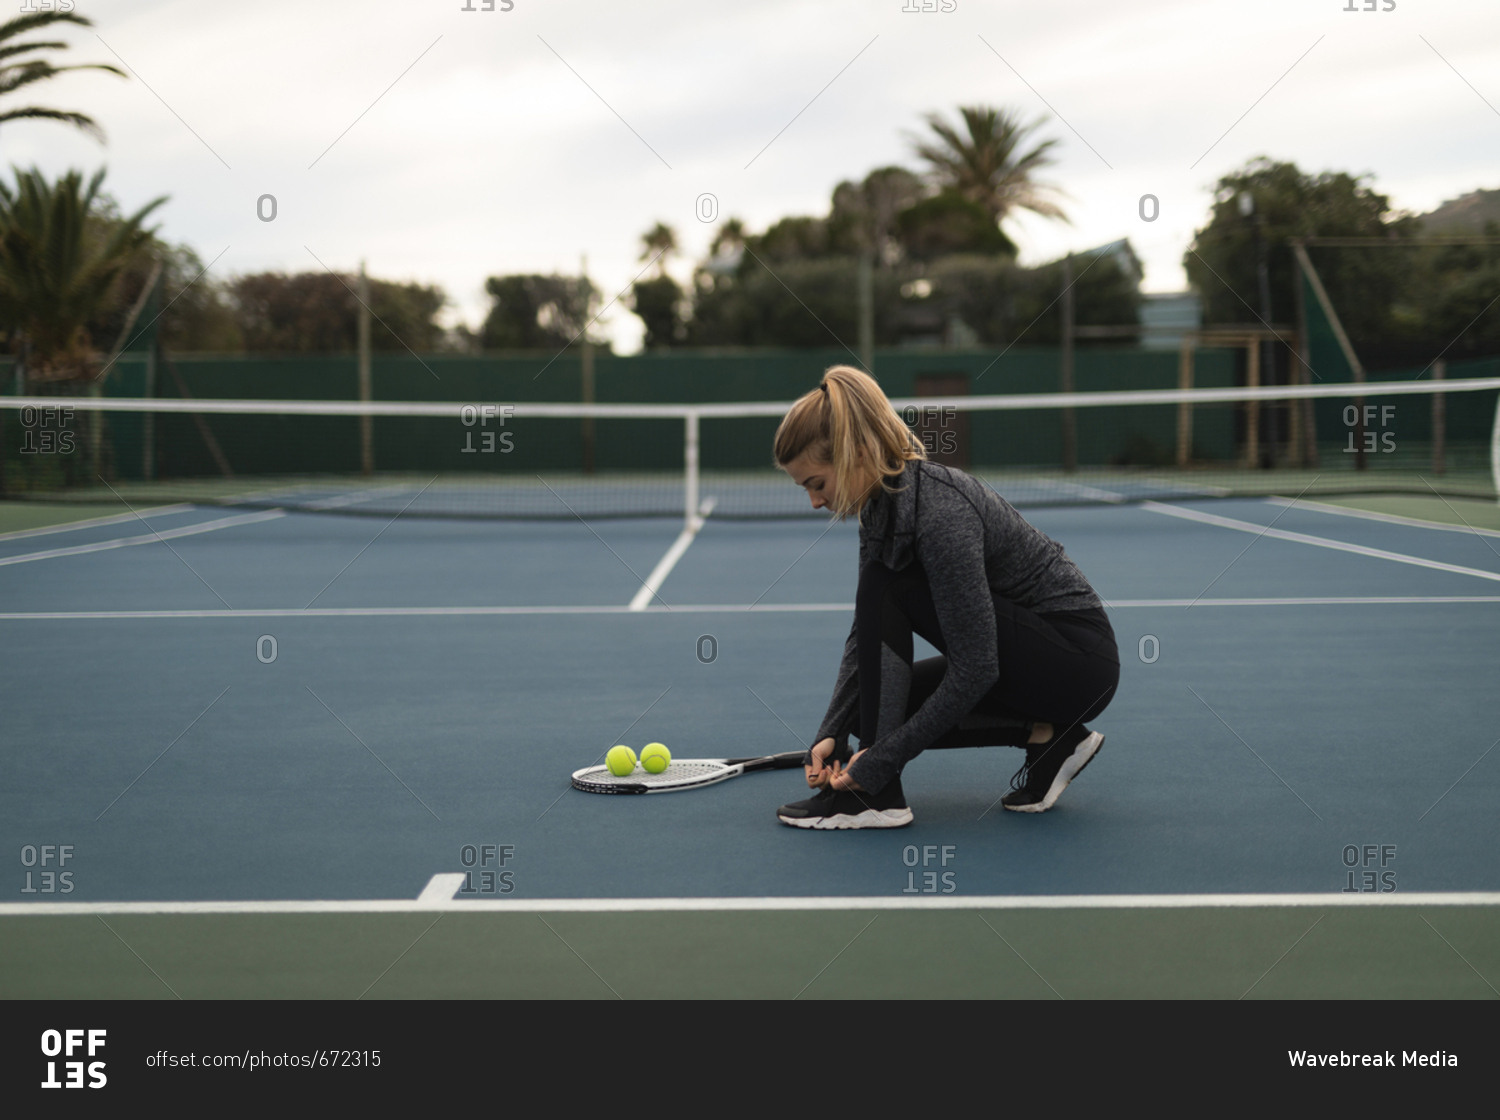 Woman tying her shoelaces in tennis court